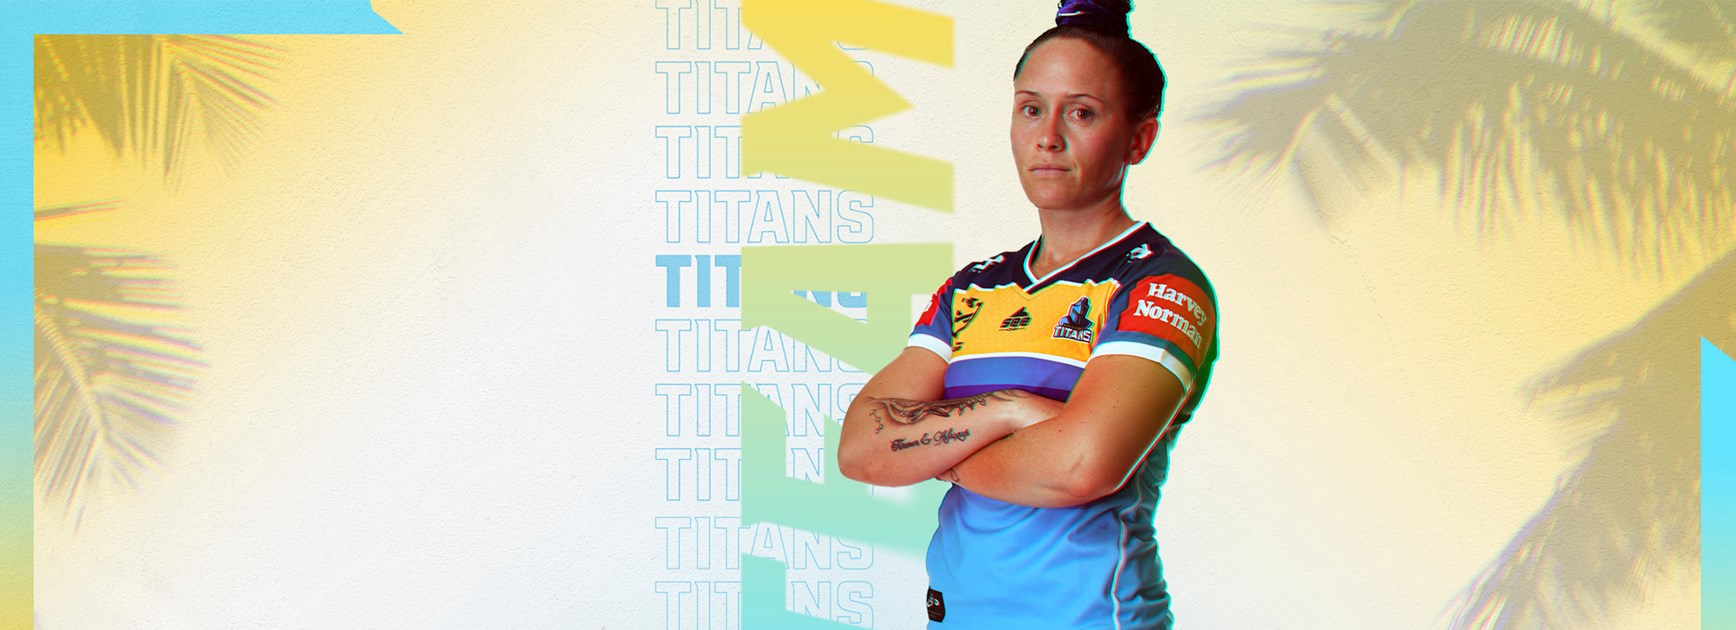 History made, as first ever Titans NRLW team selected